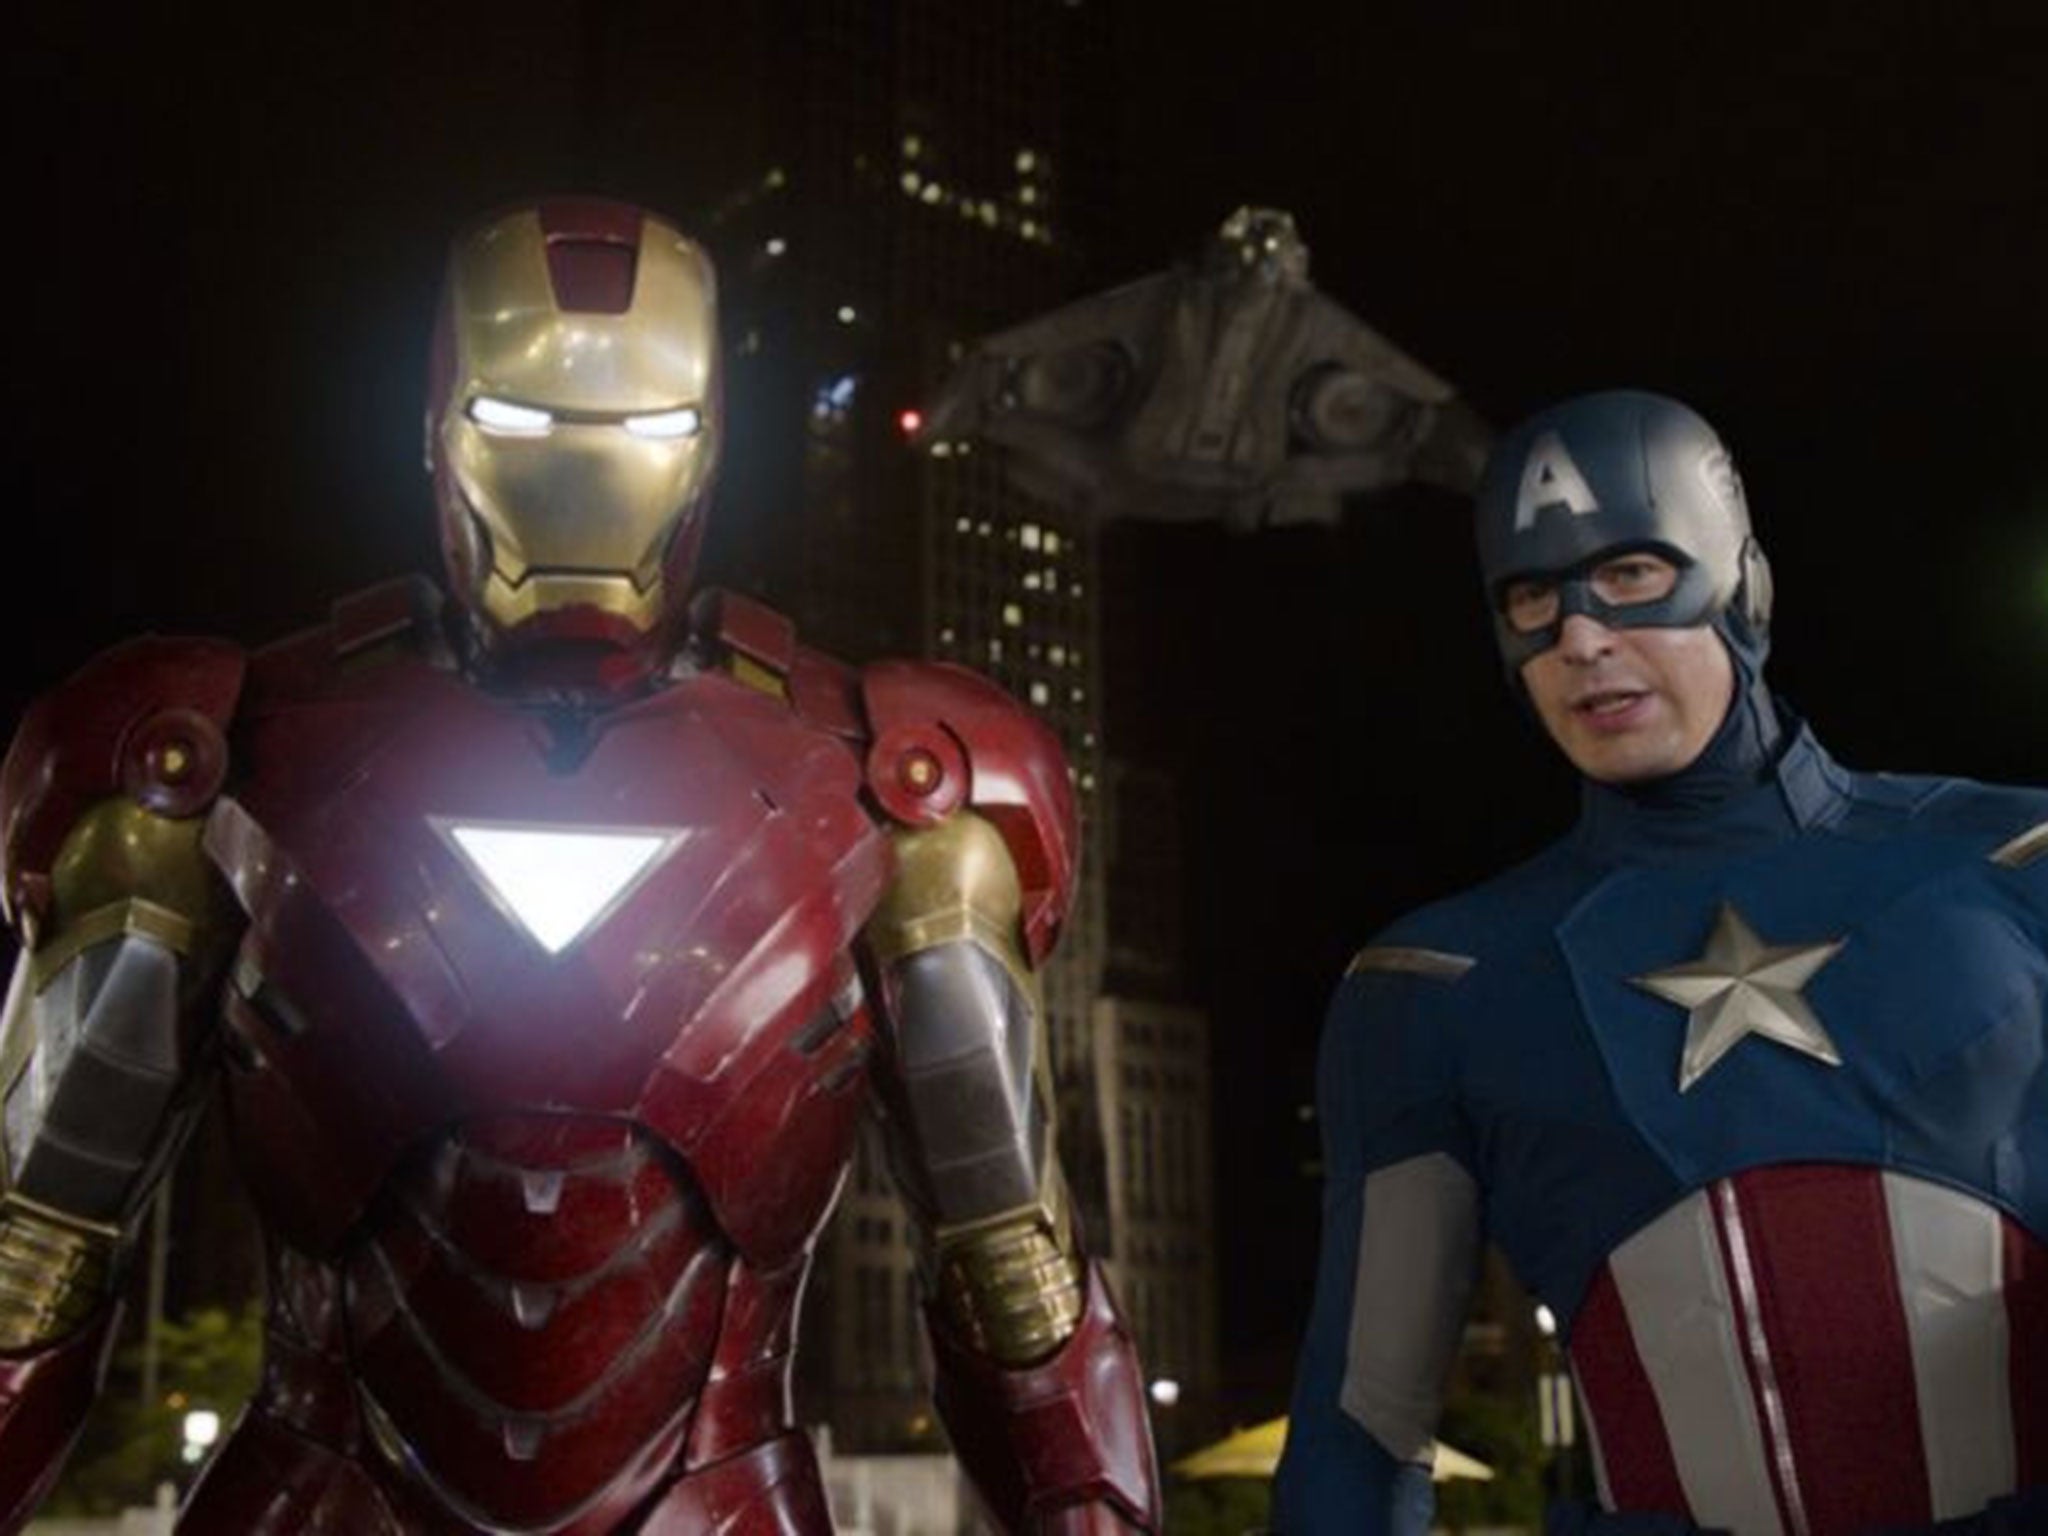 Iron Man and Captain America in a scene from "The Avengers" ahead of the release of next The Avengers: Age of Ultron